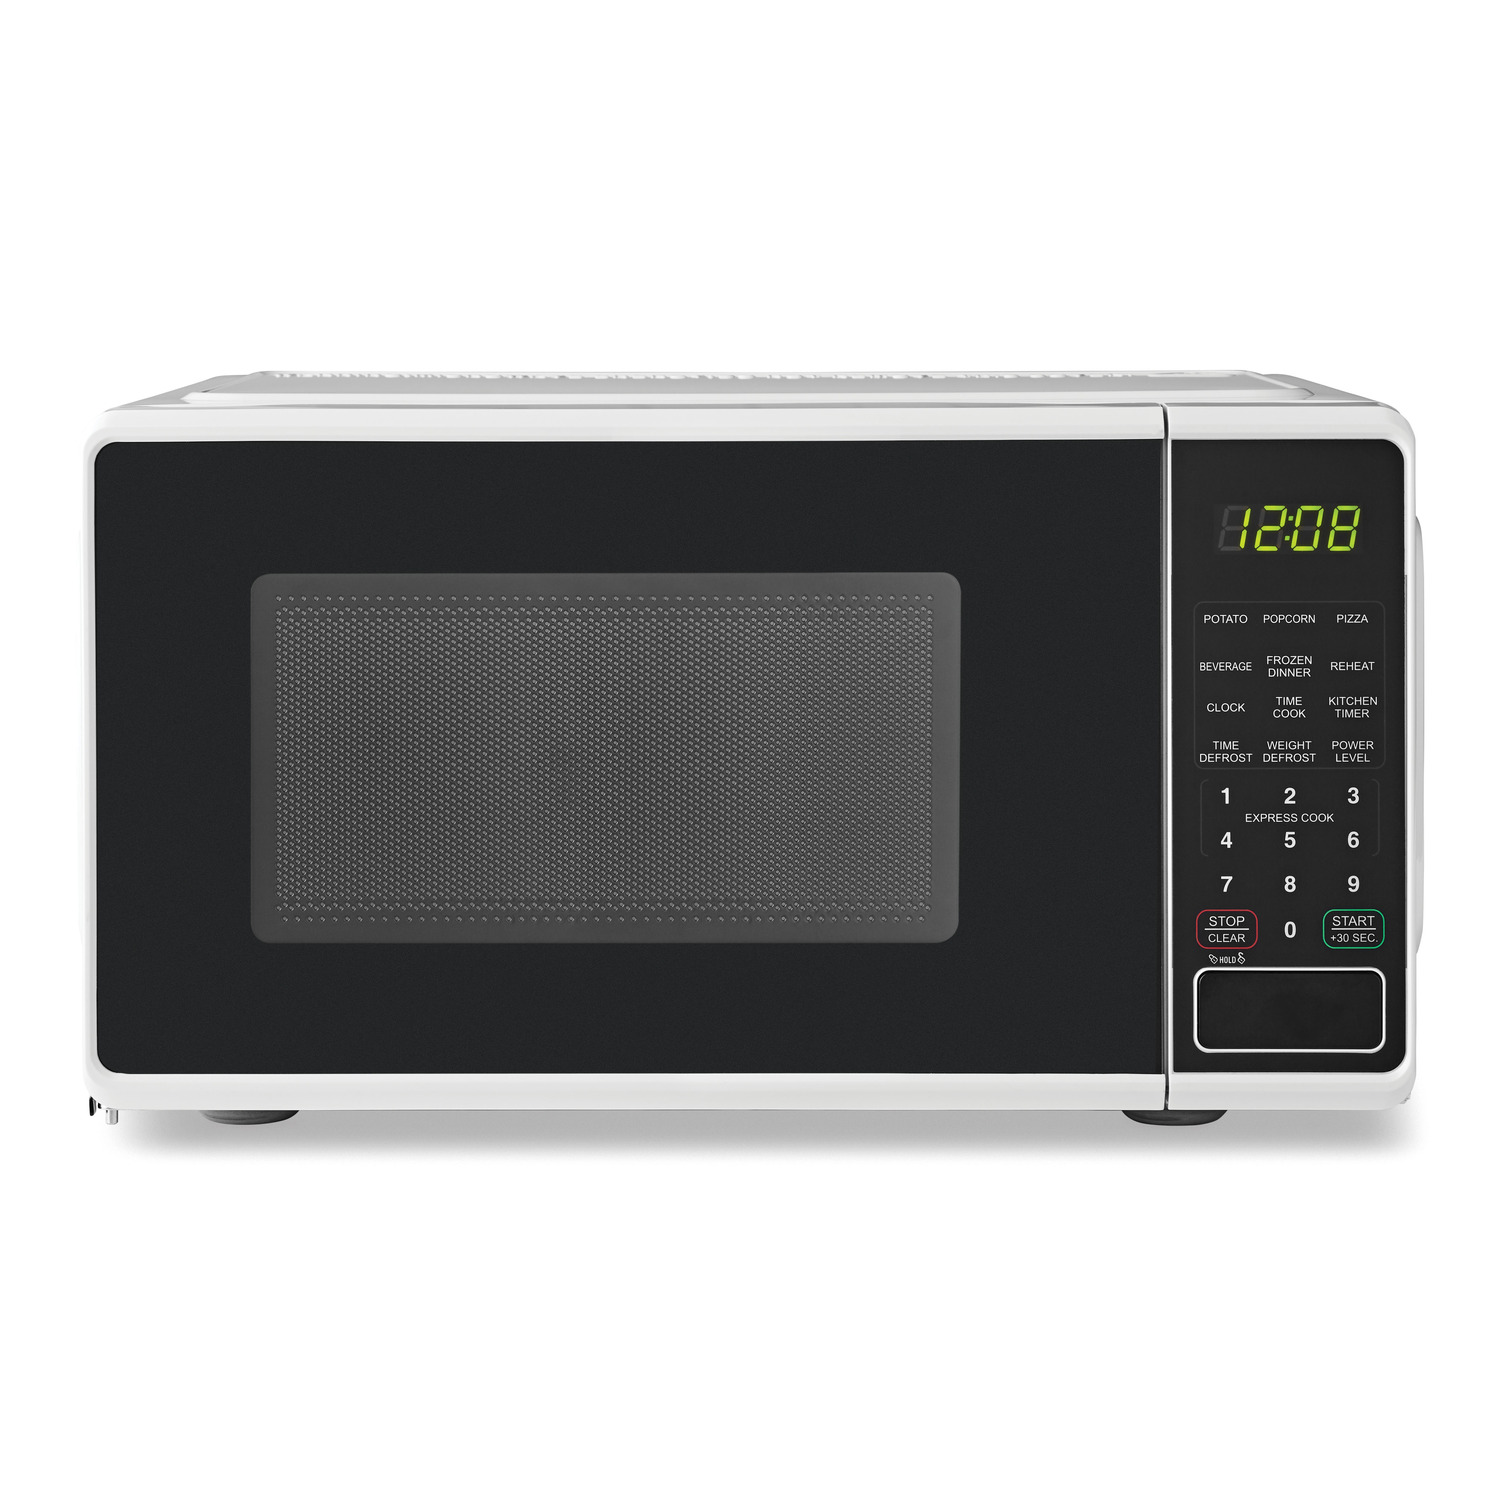 0.7 Cu ft capacity Countertop Microwave Oven 700-Watt Power with LED Display